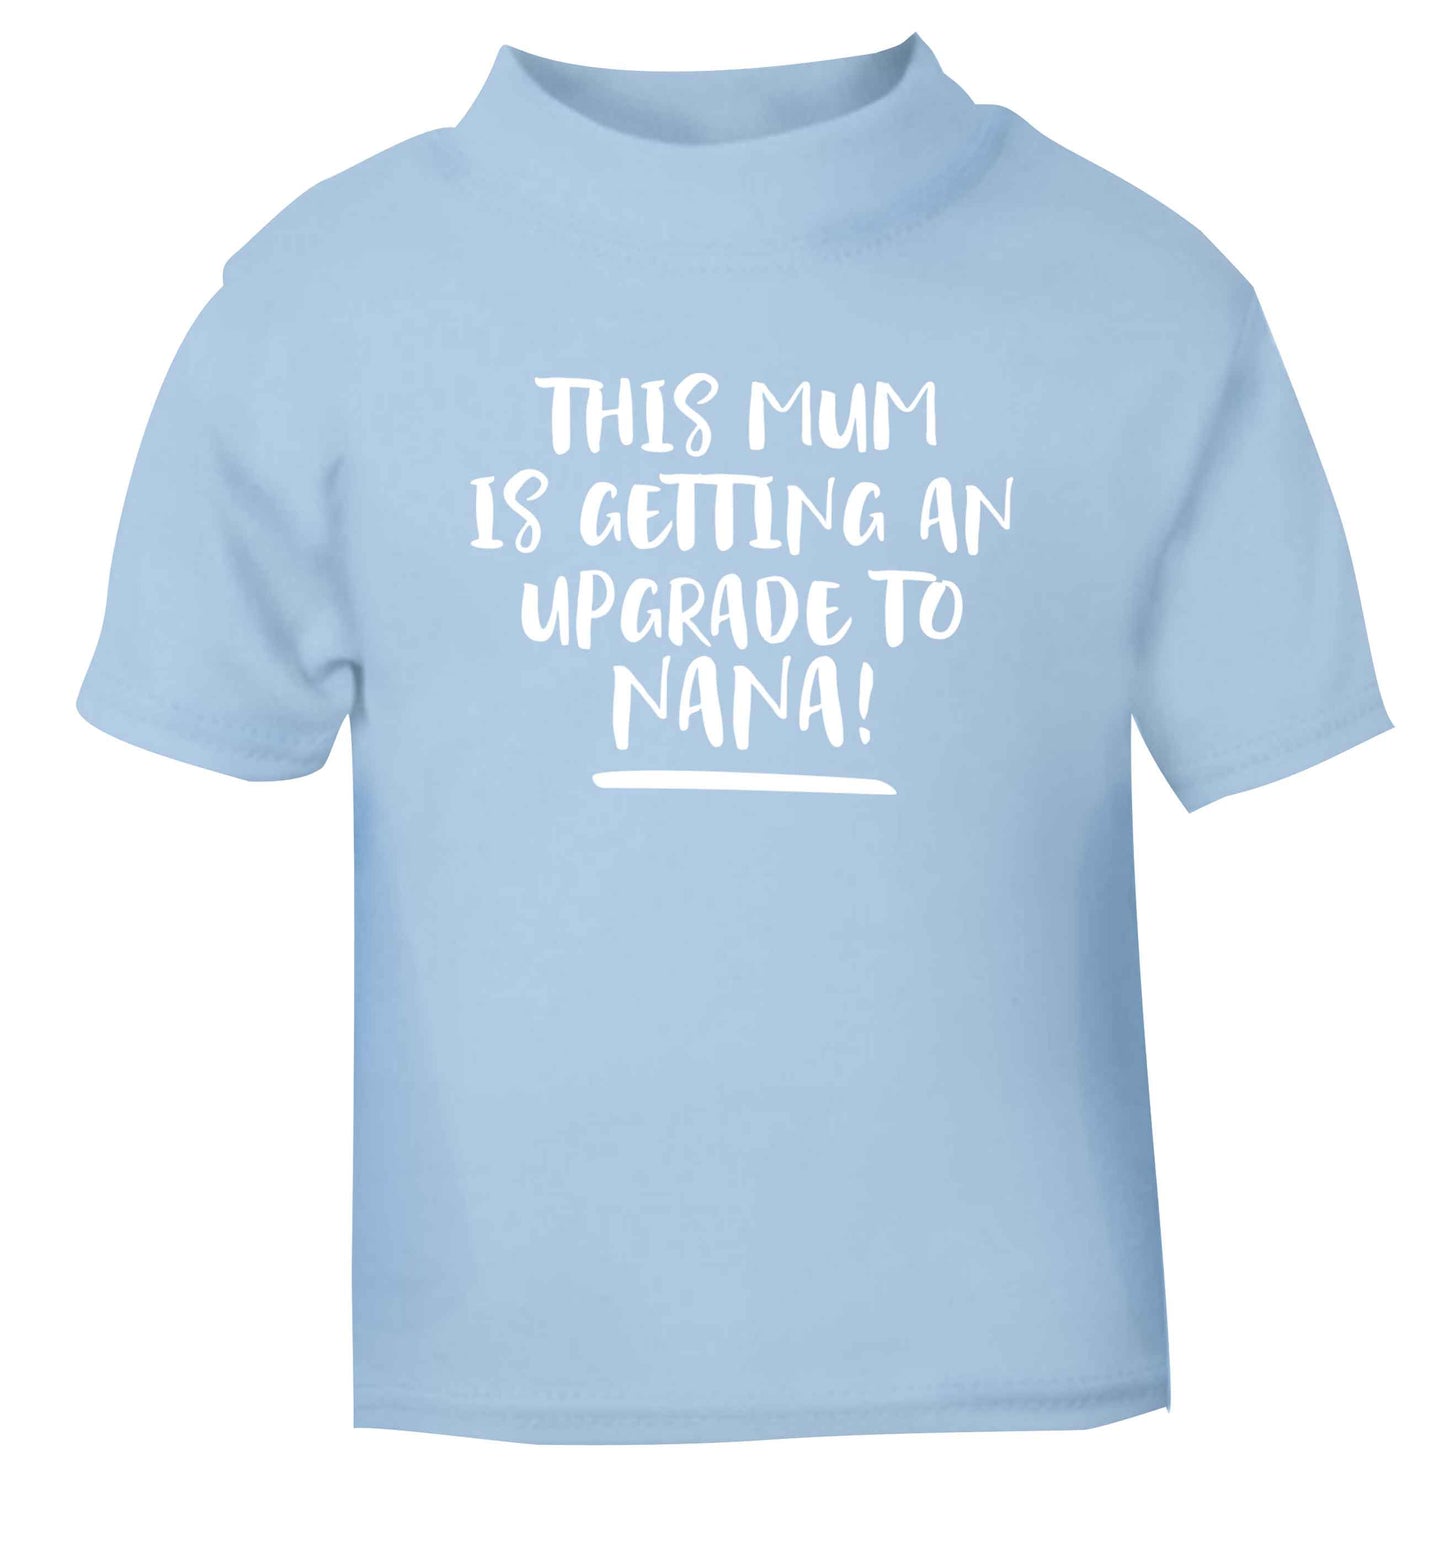 This mum is getting an upgrade to nana! light blue Baby Toddler Tshirt 2 Years